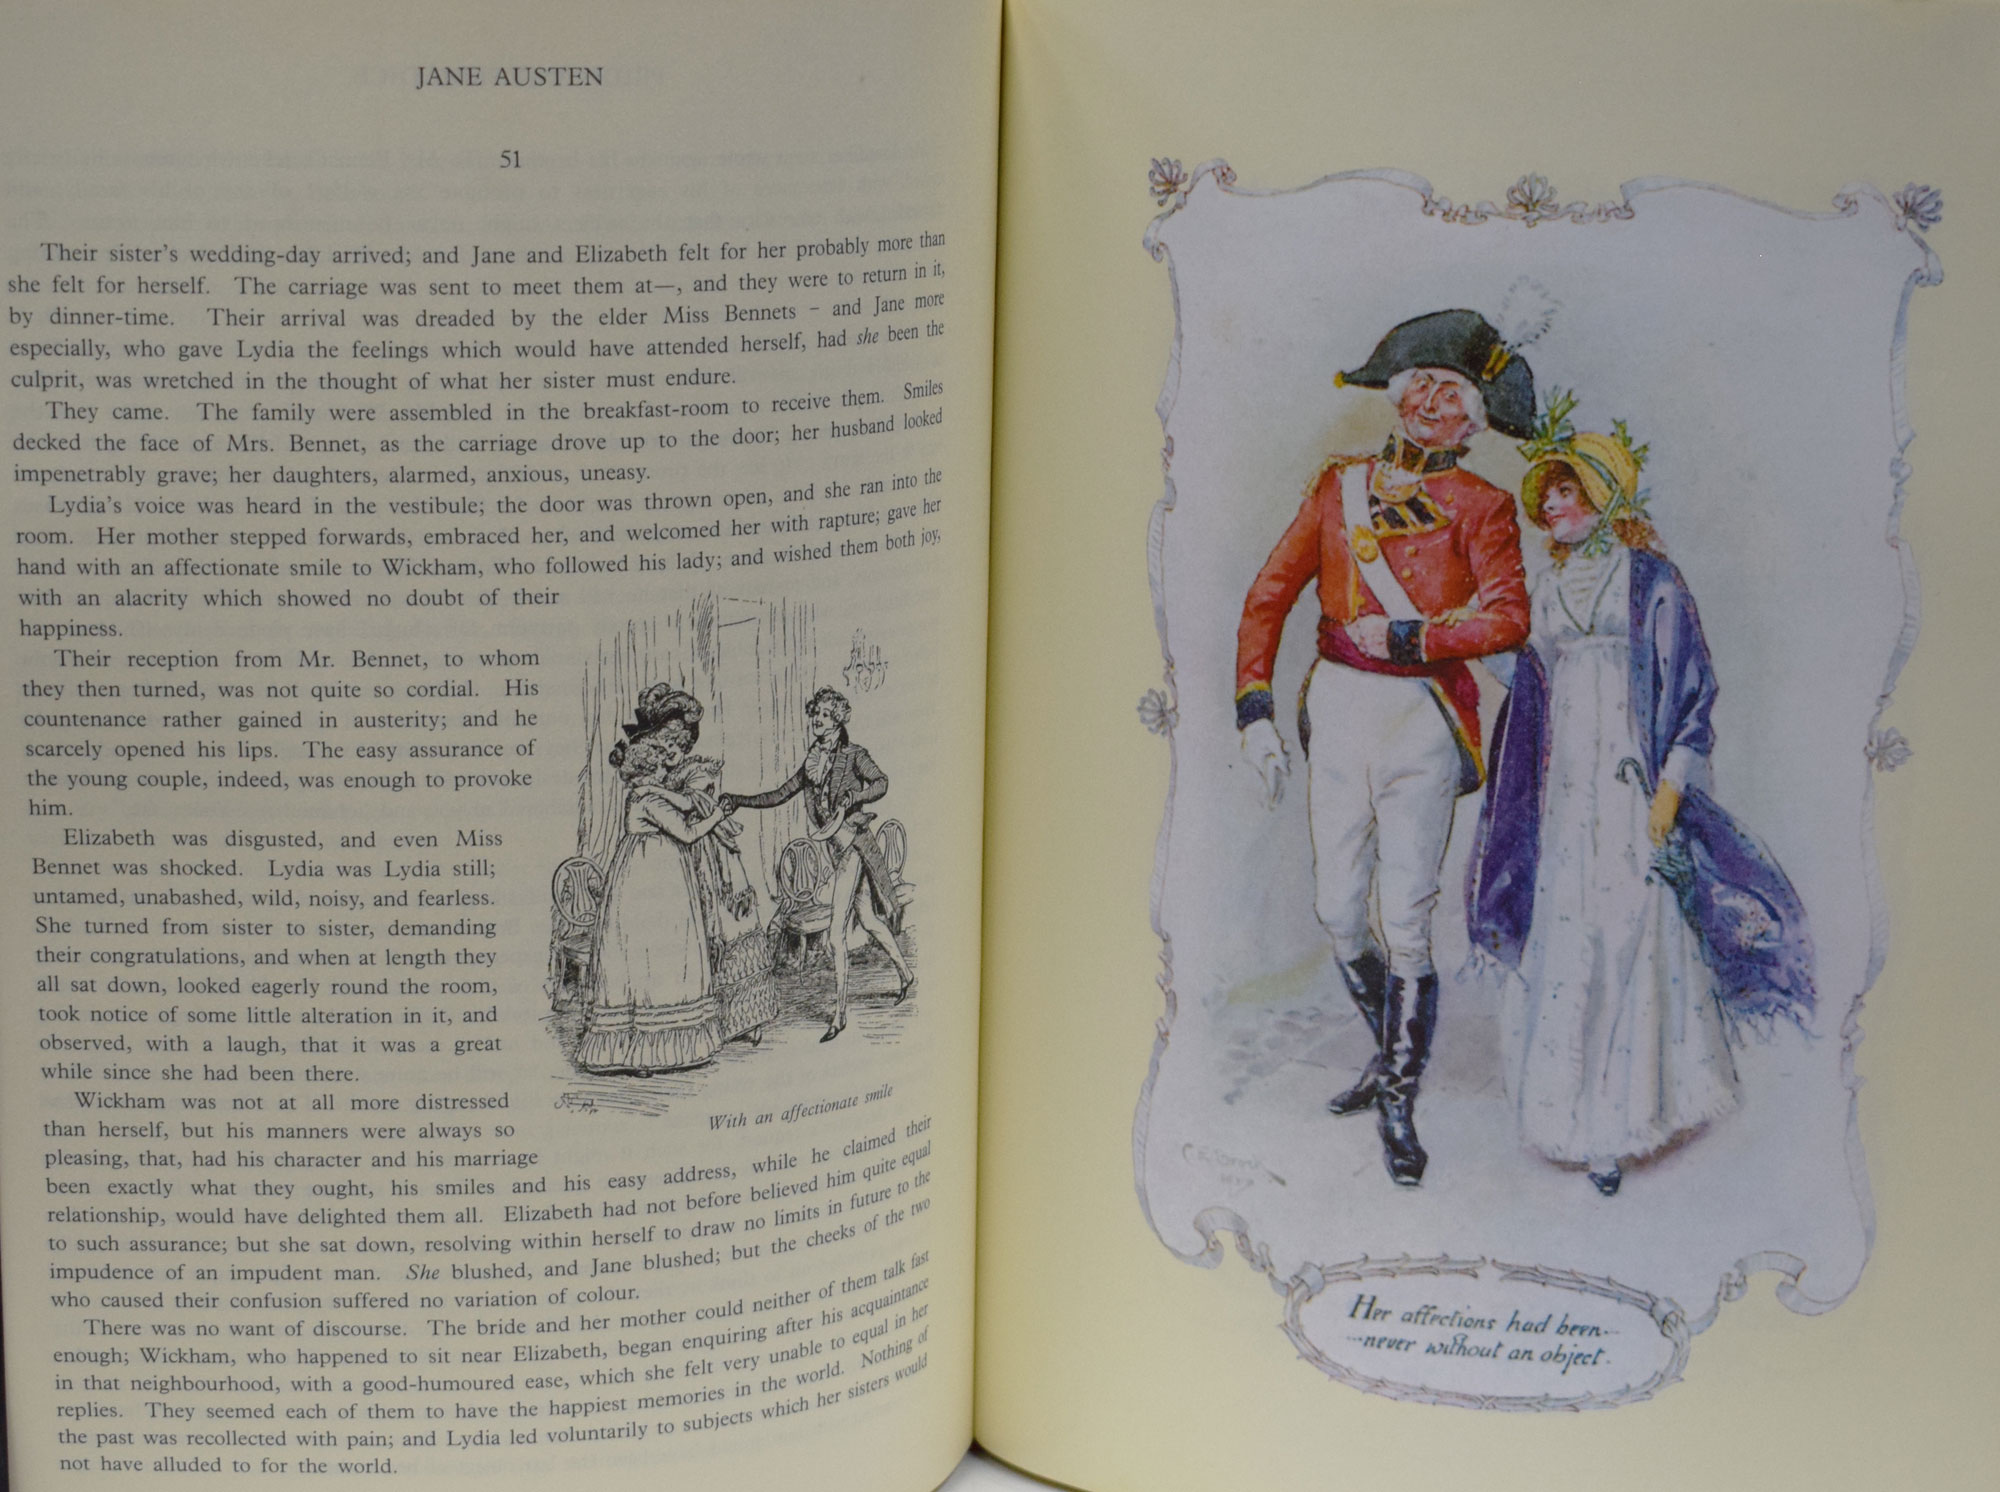 The Complete Works of Jane Austen. The Illustrated Library. Special Limited Edition. Sense and Sensibility; Pride and Prejudice; Mansfield Park; Emma; Northanger Abbey; Persuasion. The Works edition.